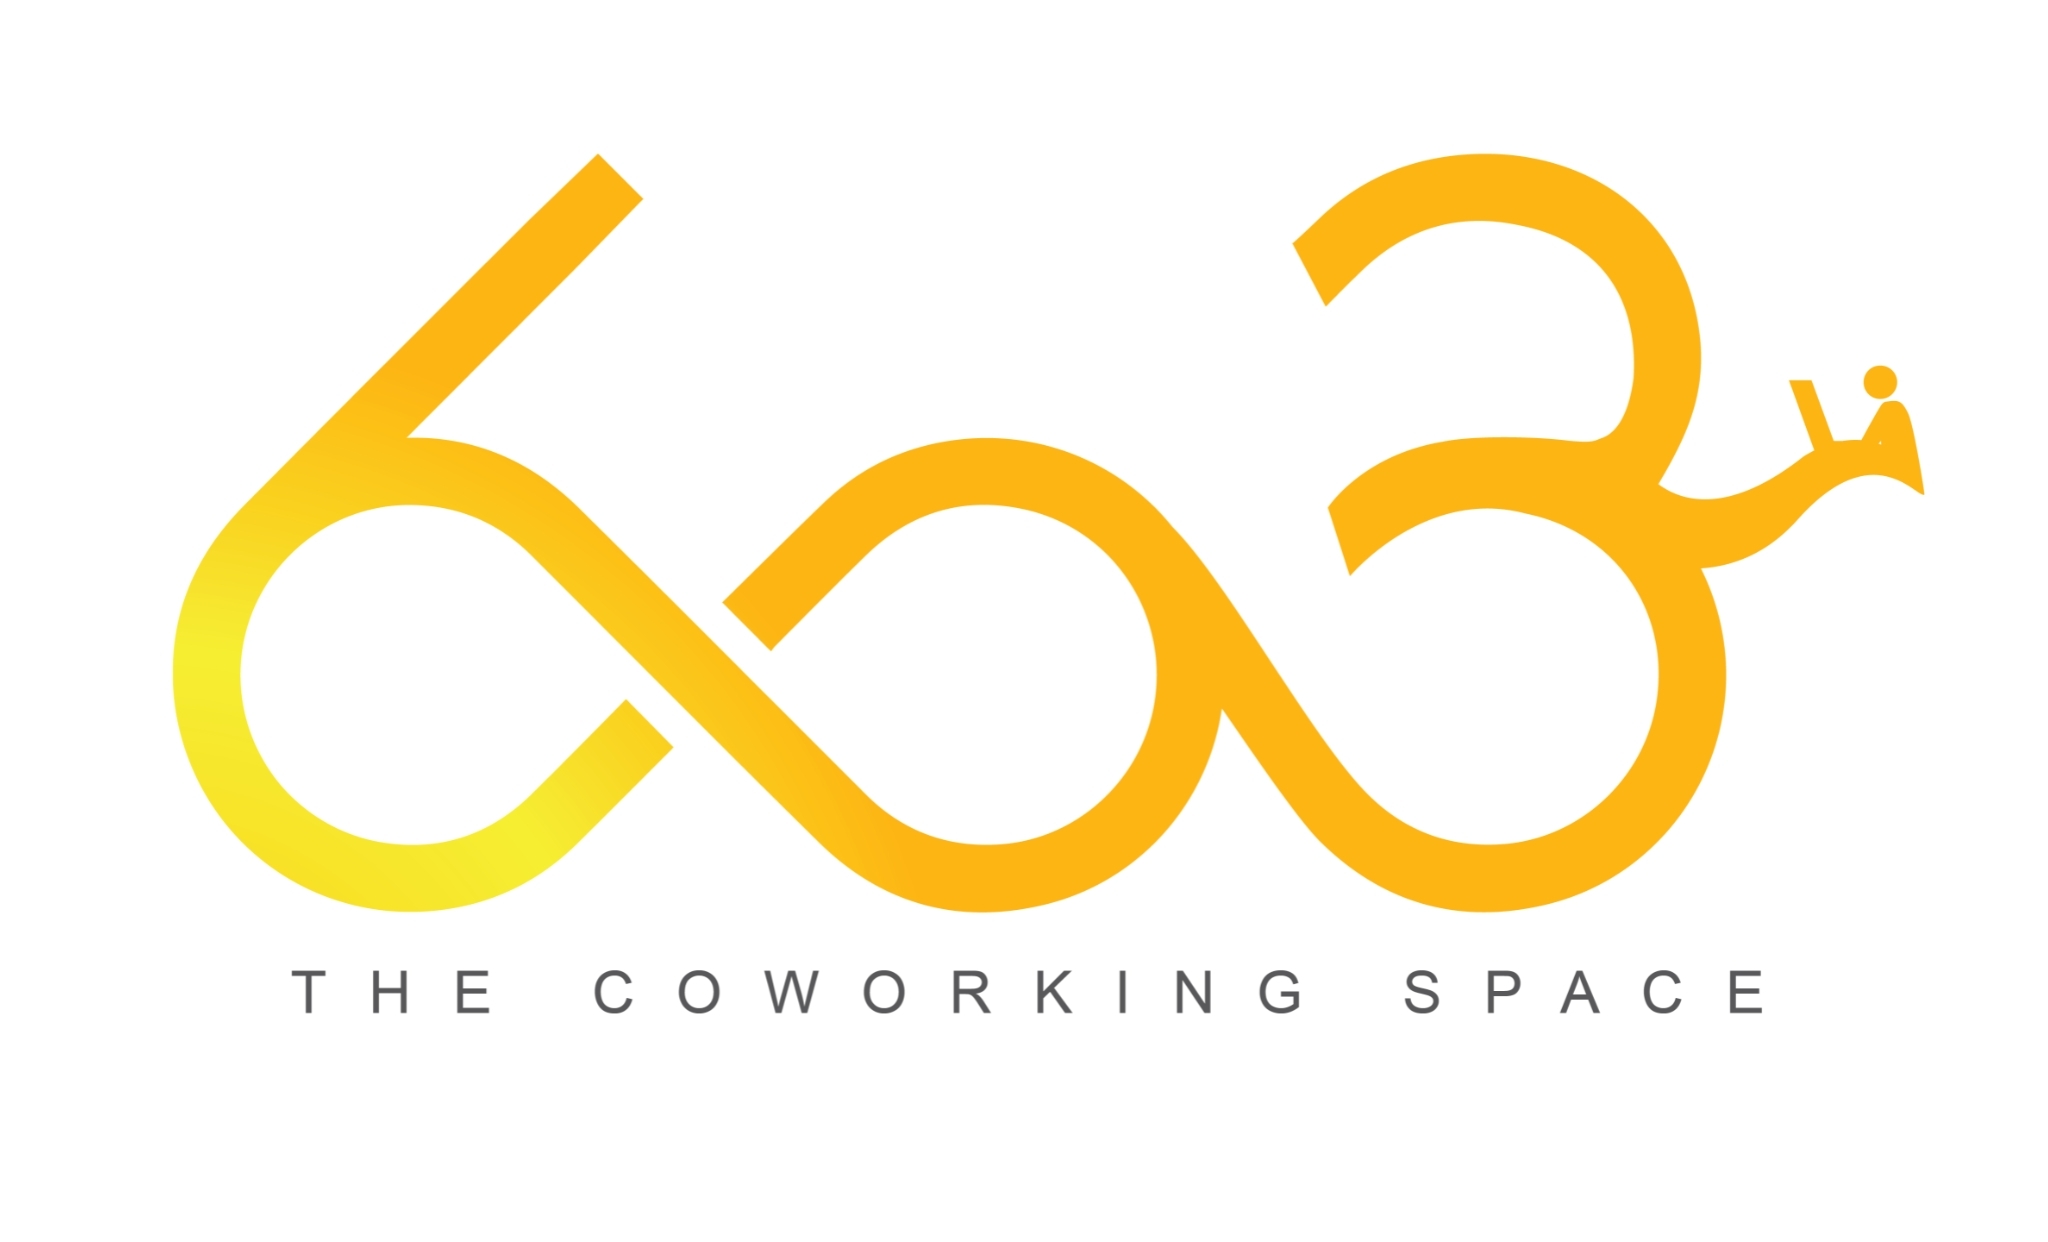 603 Coworking Space